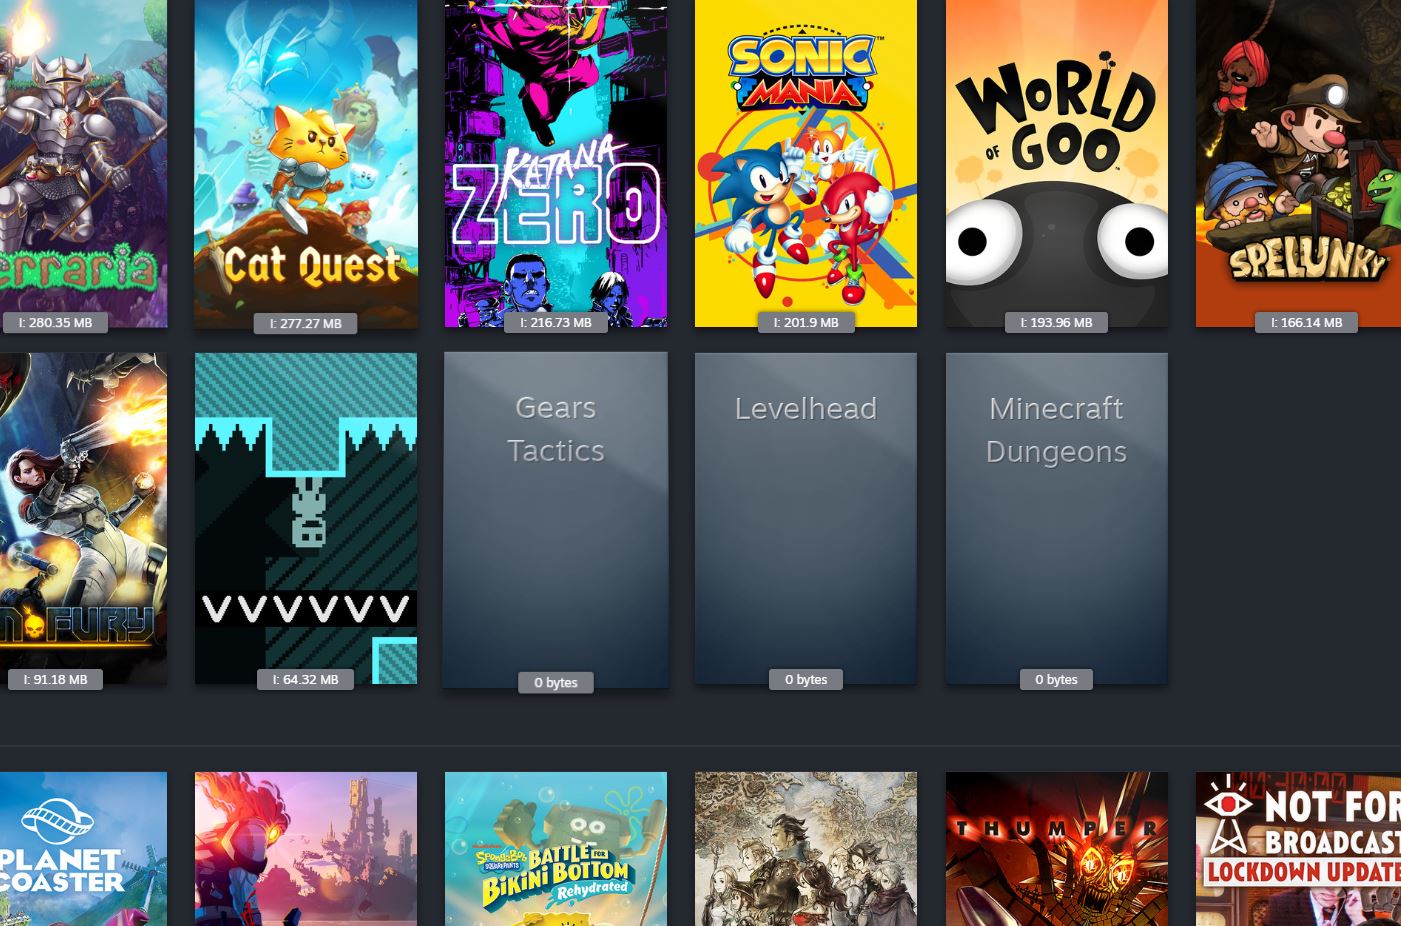 Epic's own library update finally adds a List view for your game collection